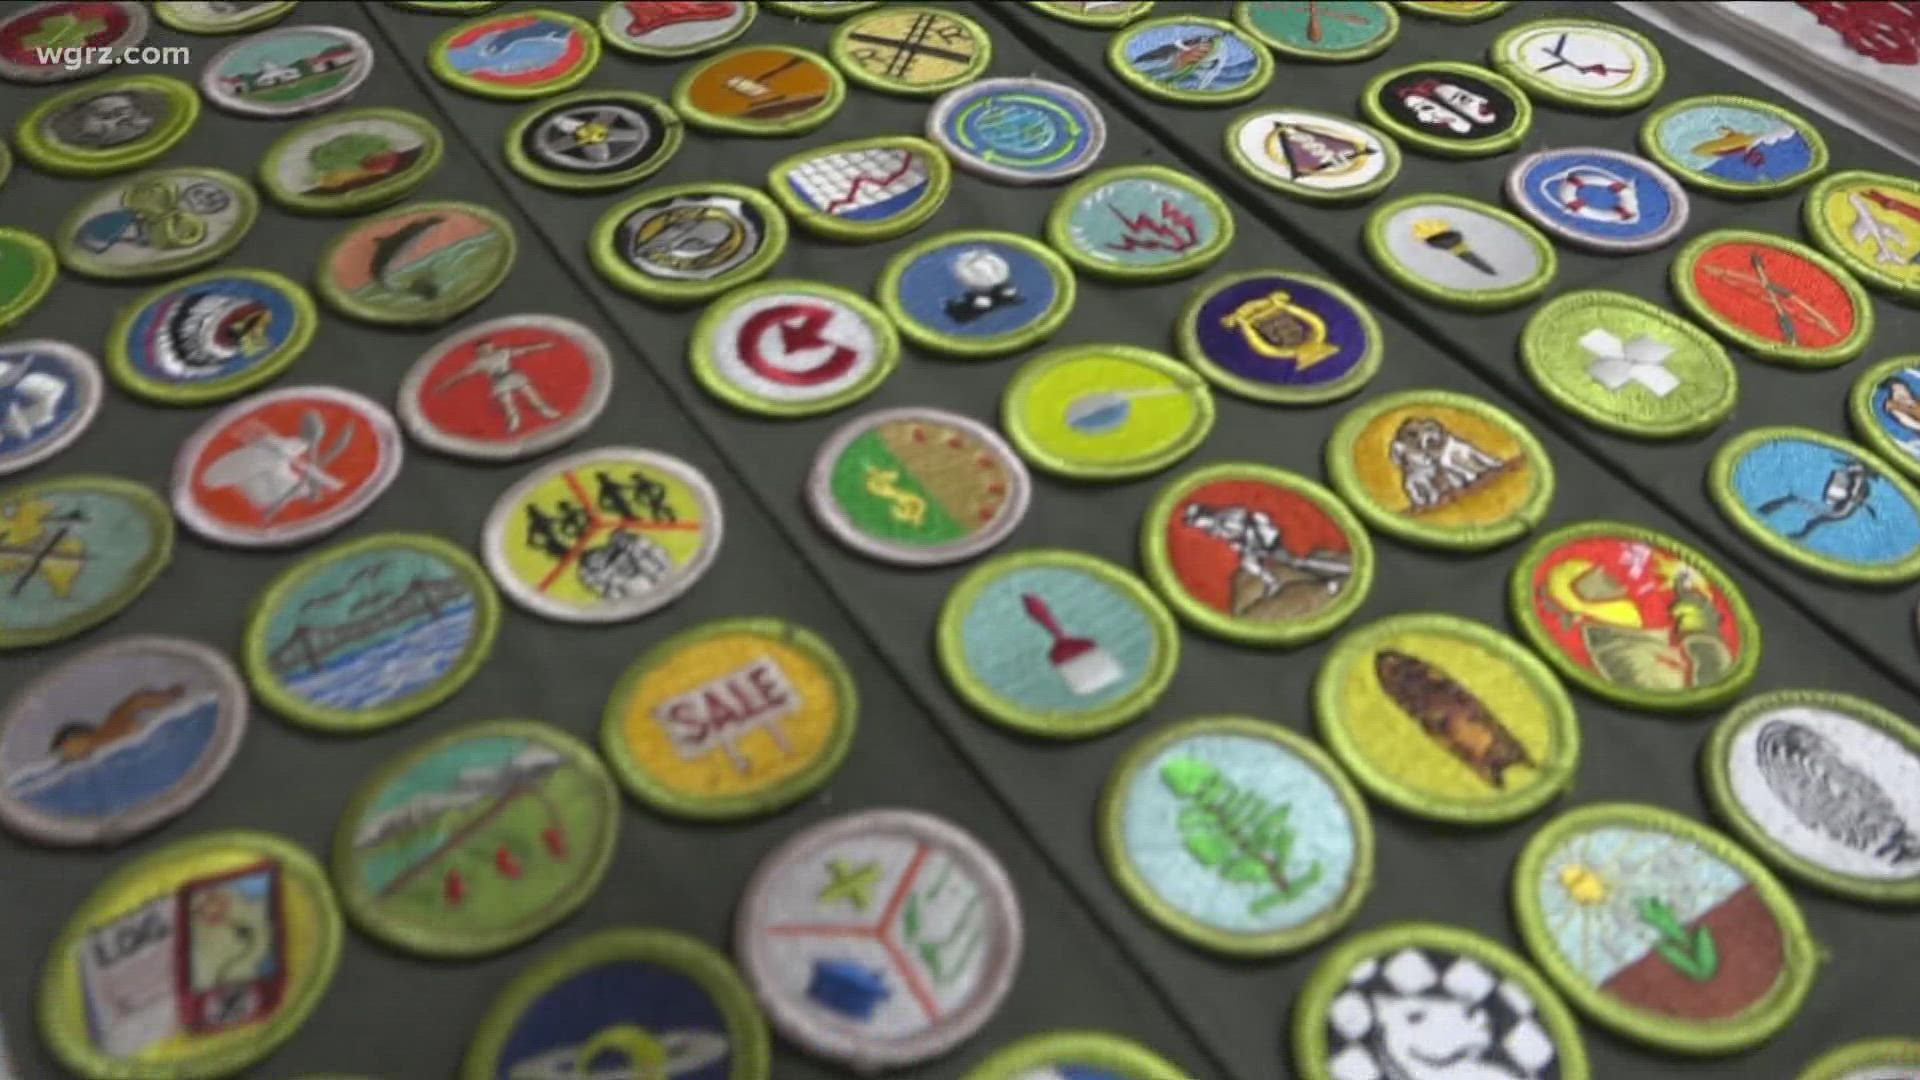 18-year-old Kevin Thompson collected the more than 130 merit badges over a 7 year span.